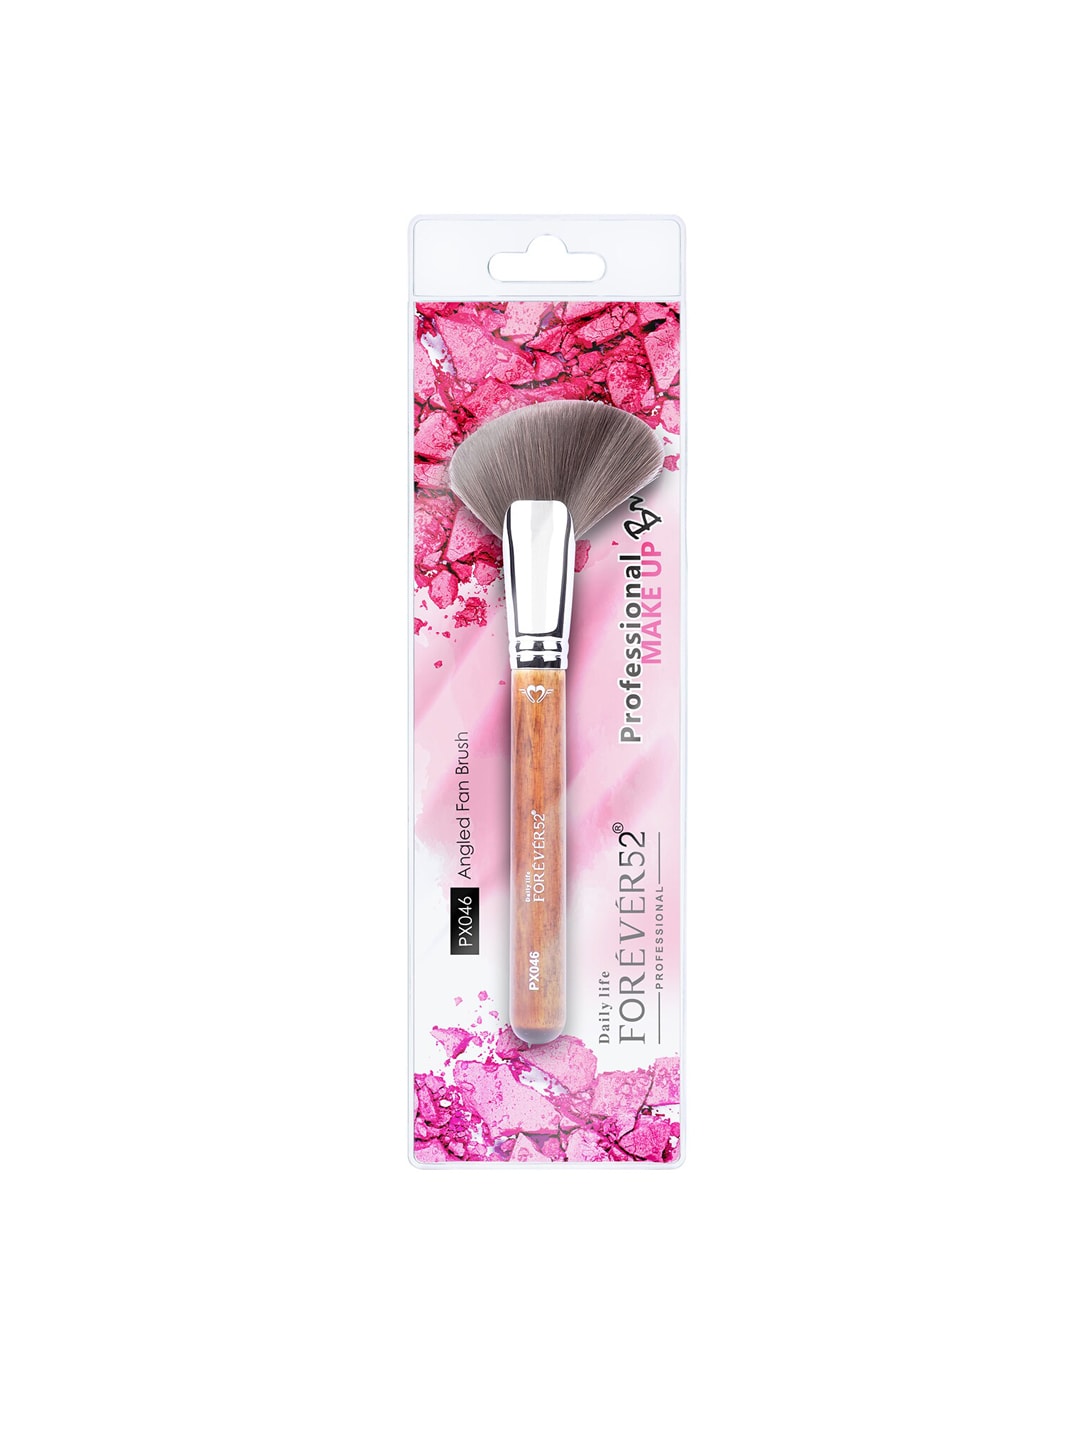 Daily Life Forever52 Makeup Brush PX046 Price in India